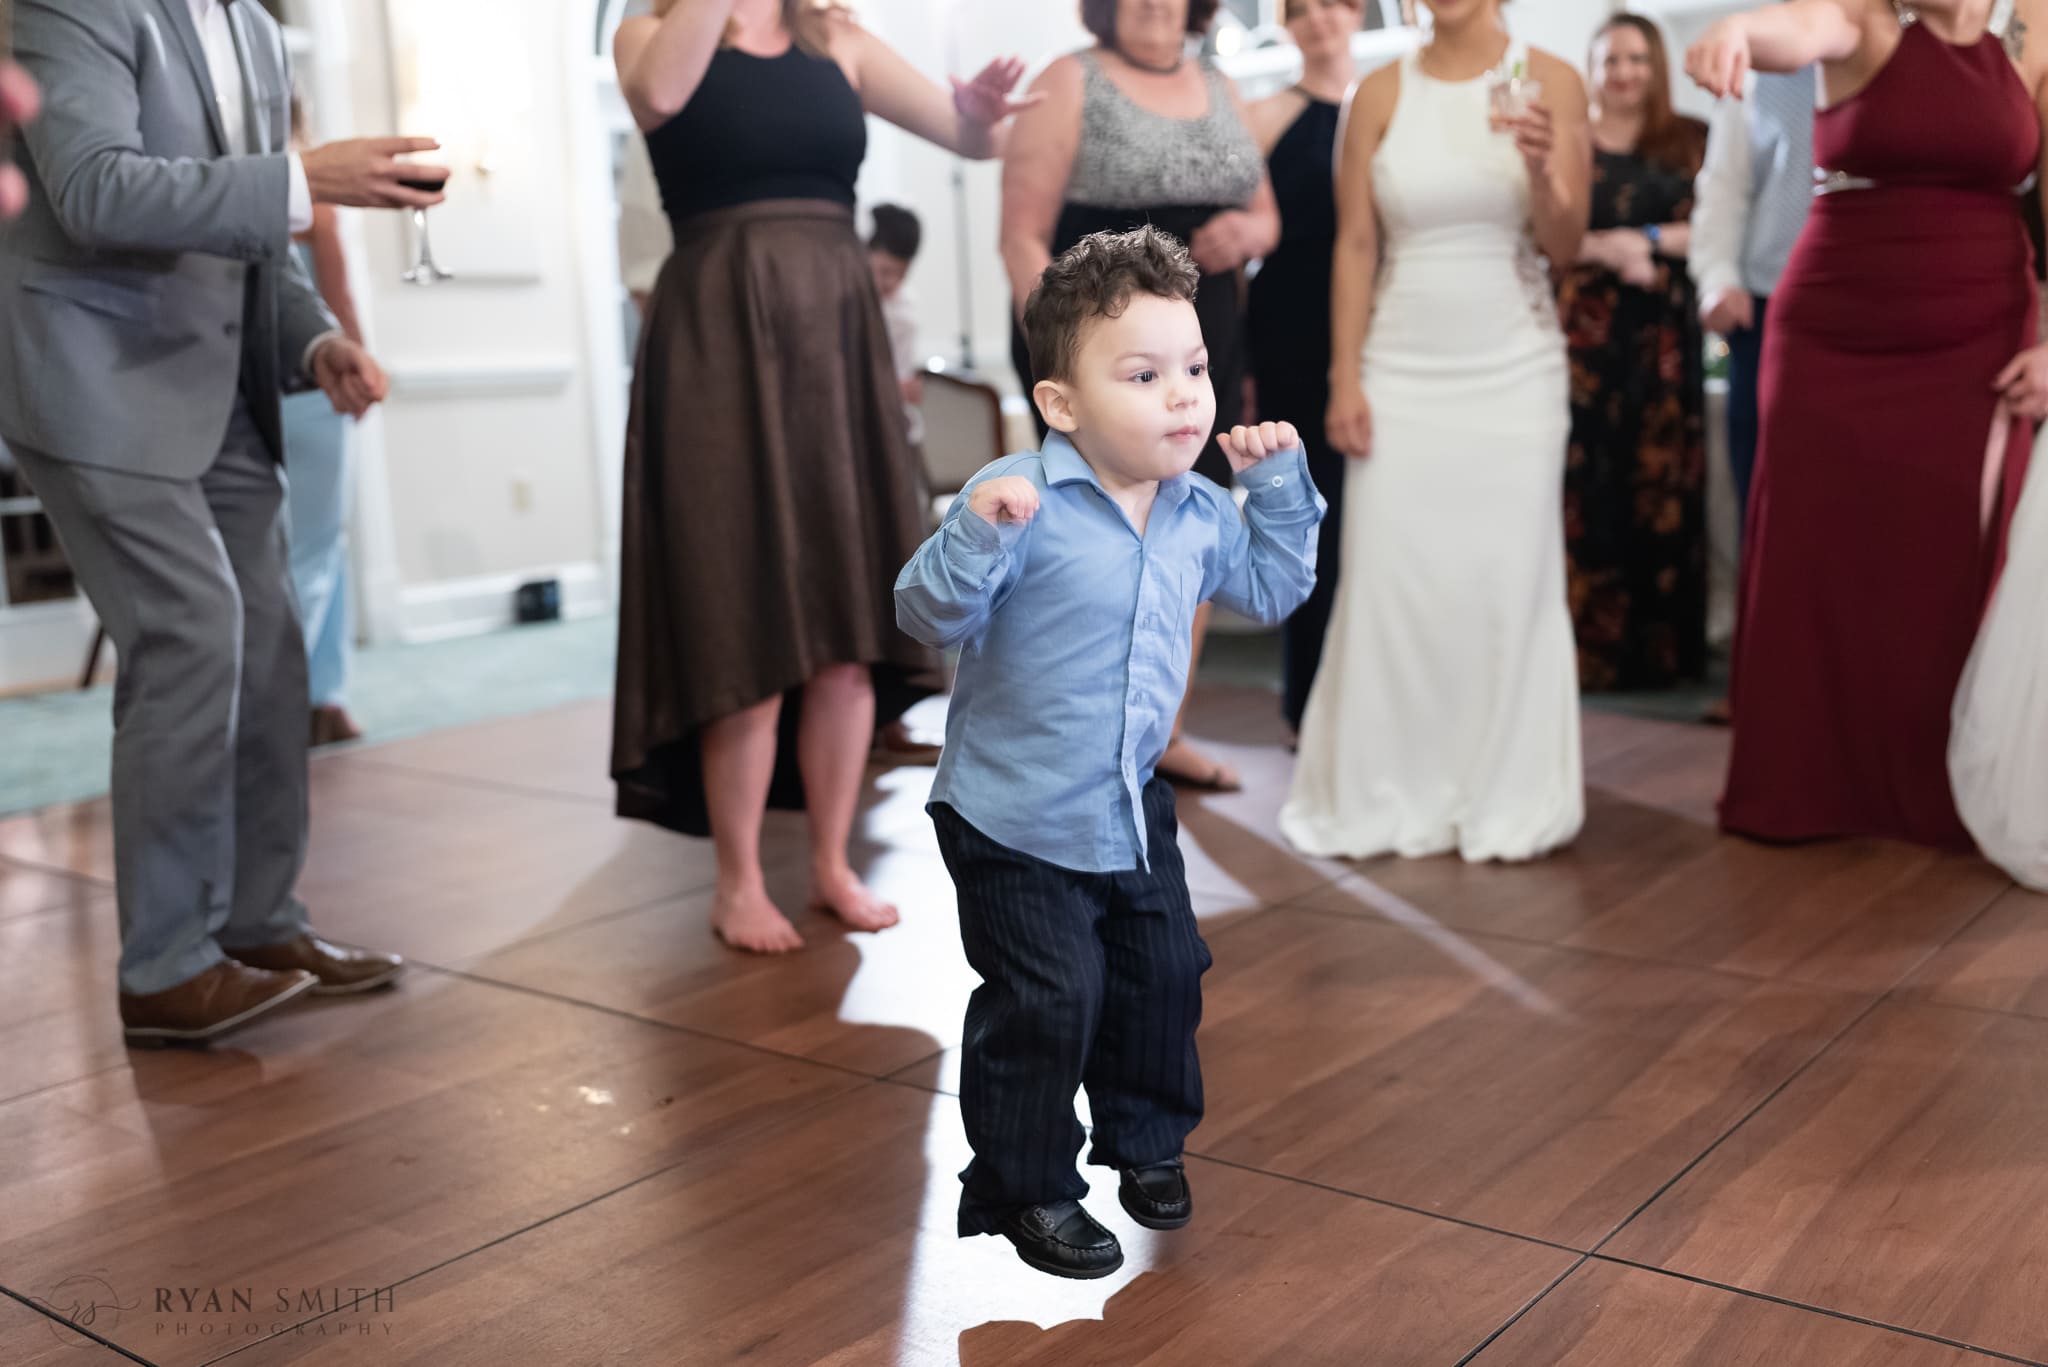 Little guy showing off his moves - Kimbels at Wachesaw Plantation